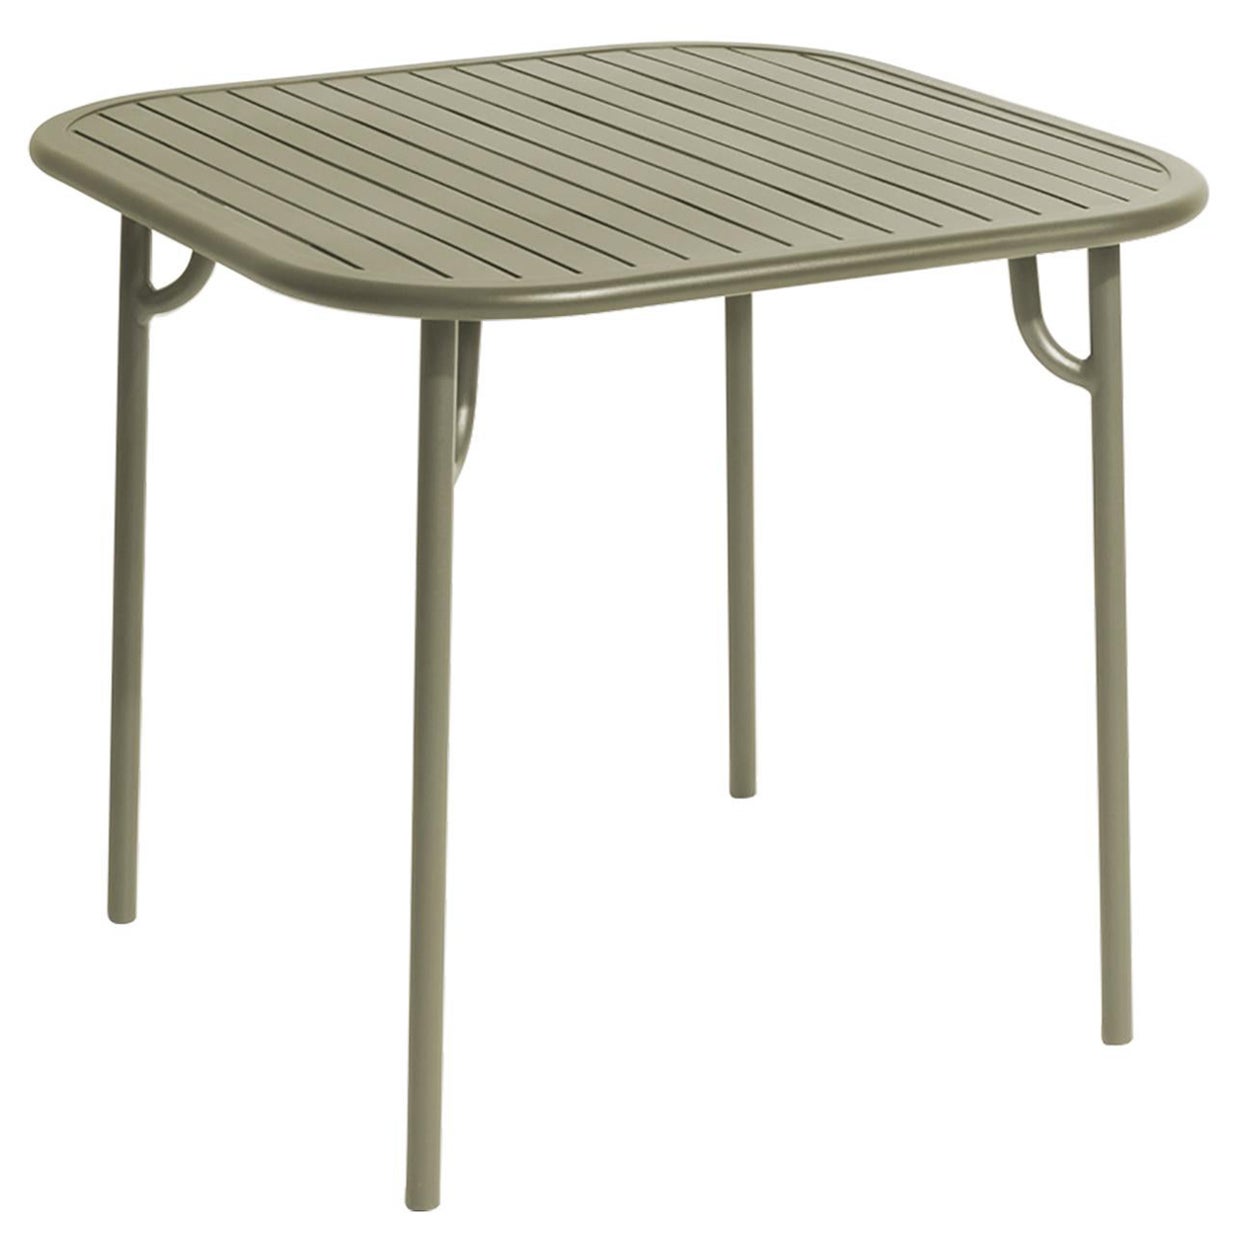 Petite Friture Week-End Square Dining Table in Jade Green Aluminium with Slats For Sale